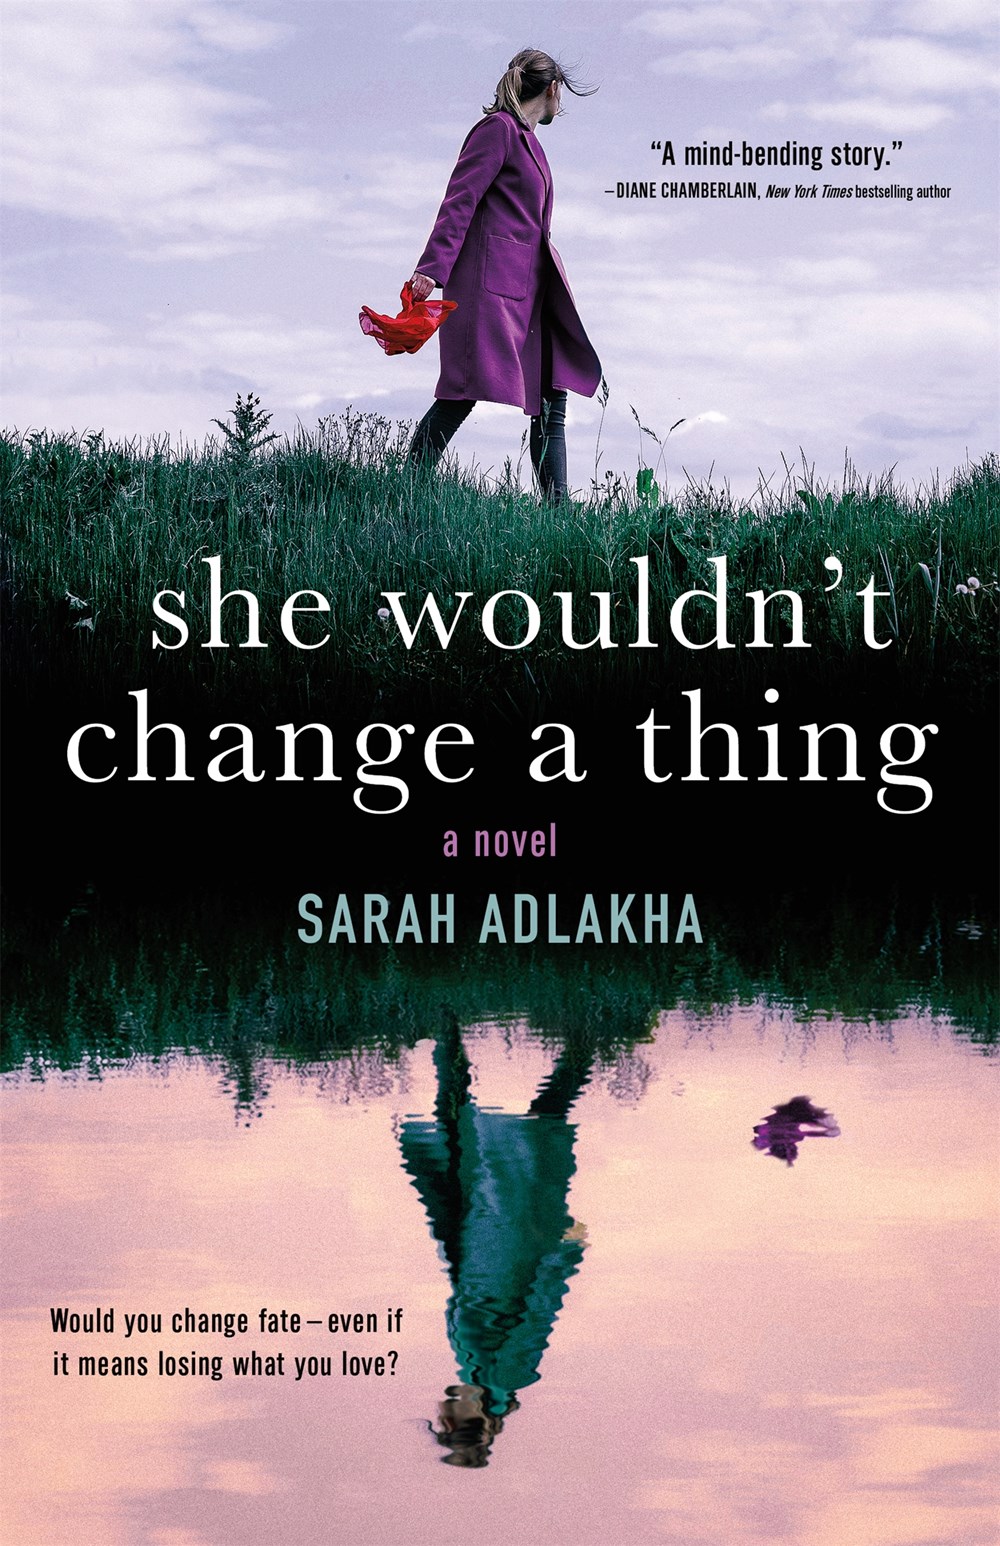 She Wouldn't Change a Thing by Sarah Adlakha